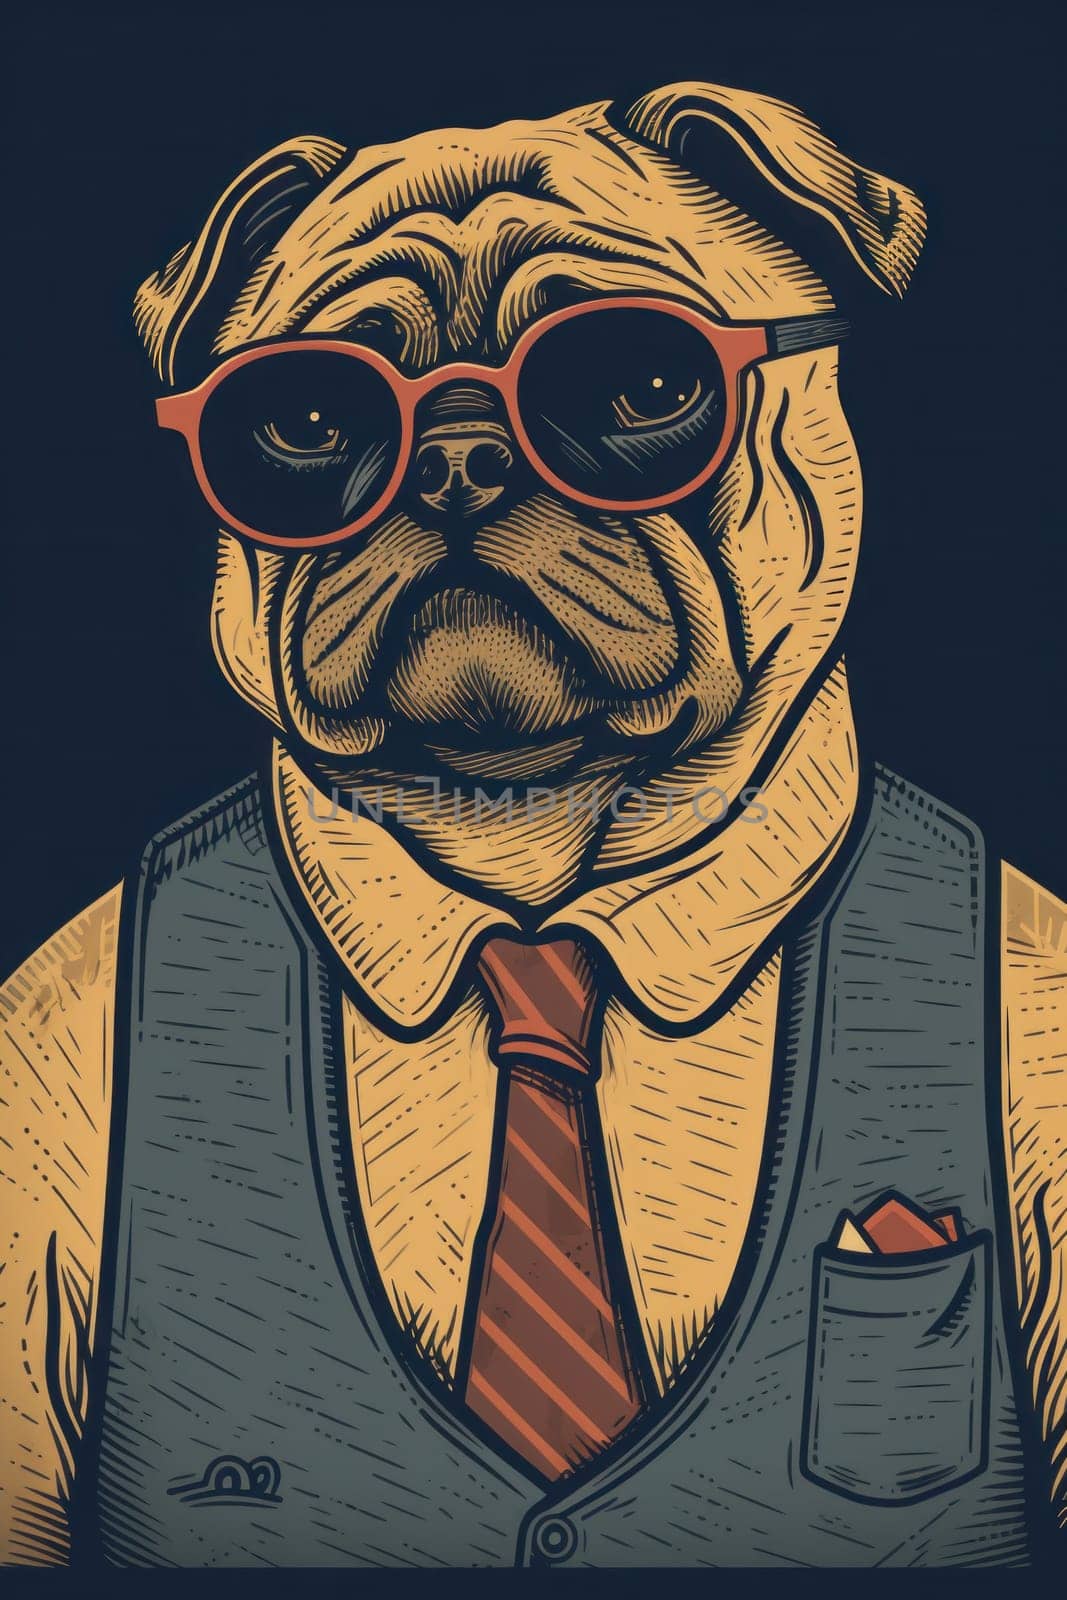 A pug wearing glasses and a tie